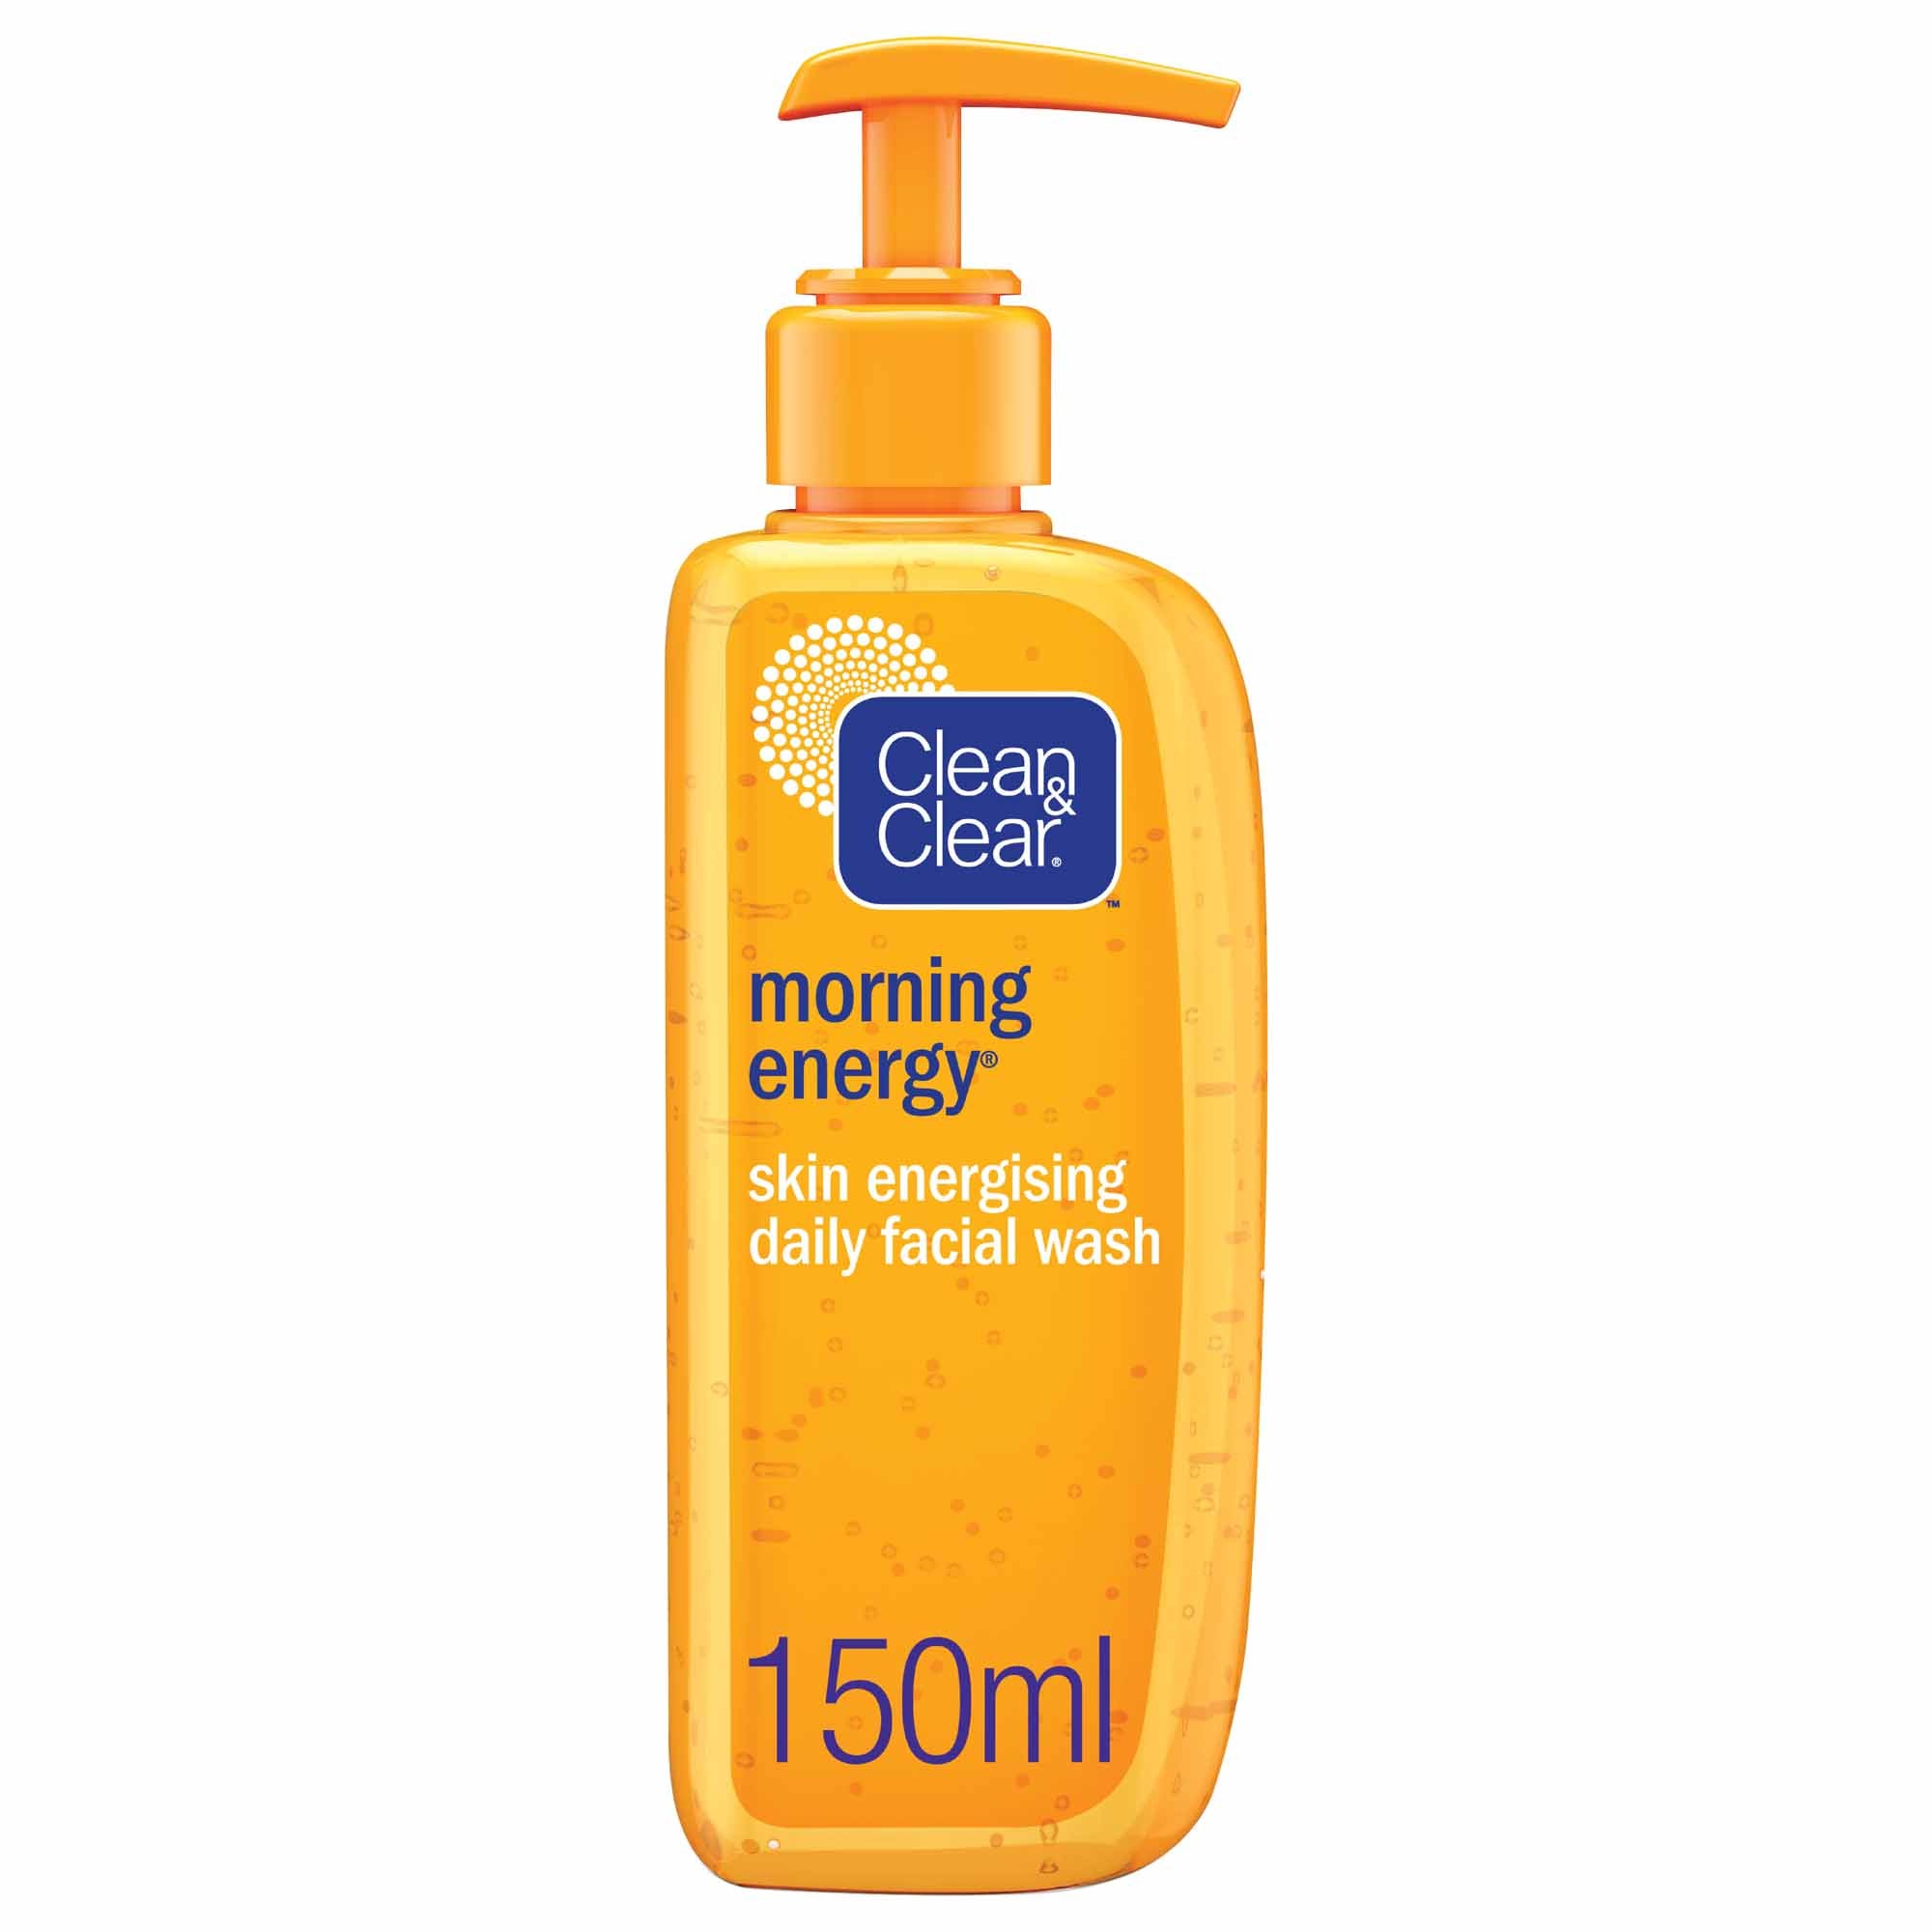 Clean & Clear Daily Face Wash Morning Energy Skin Energising